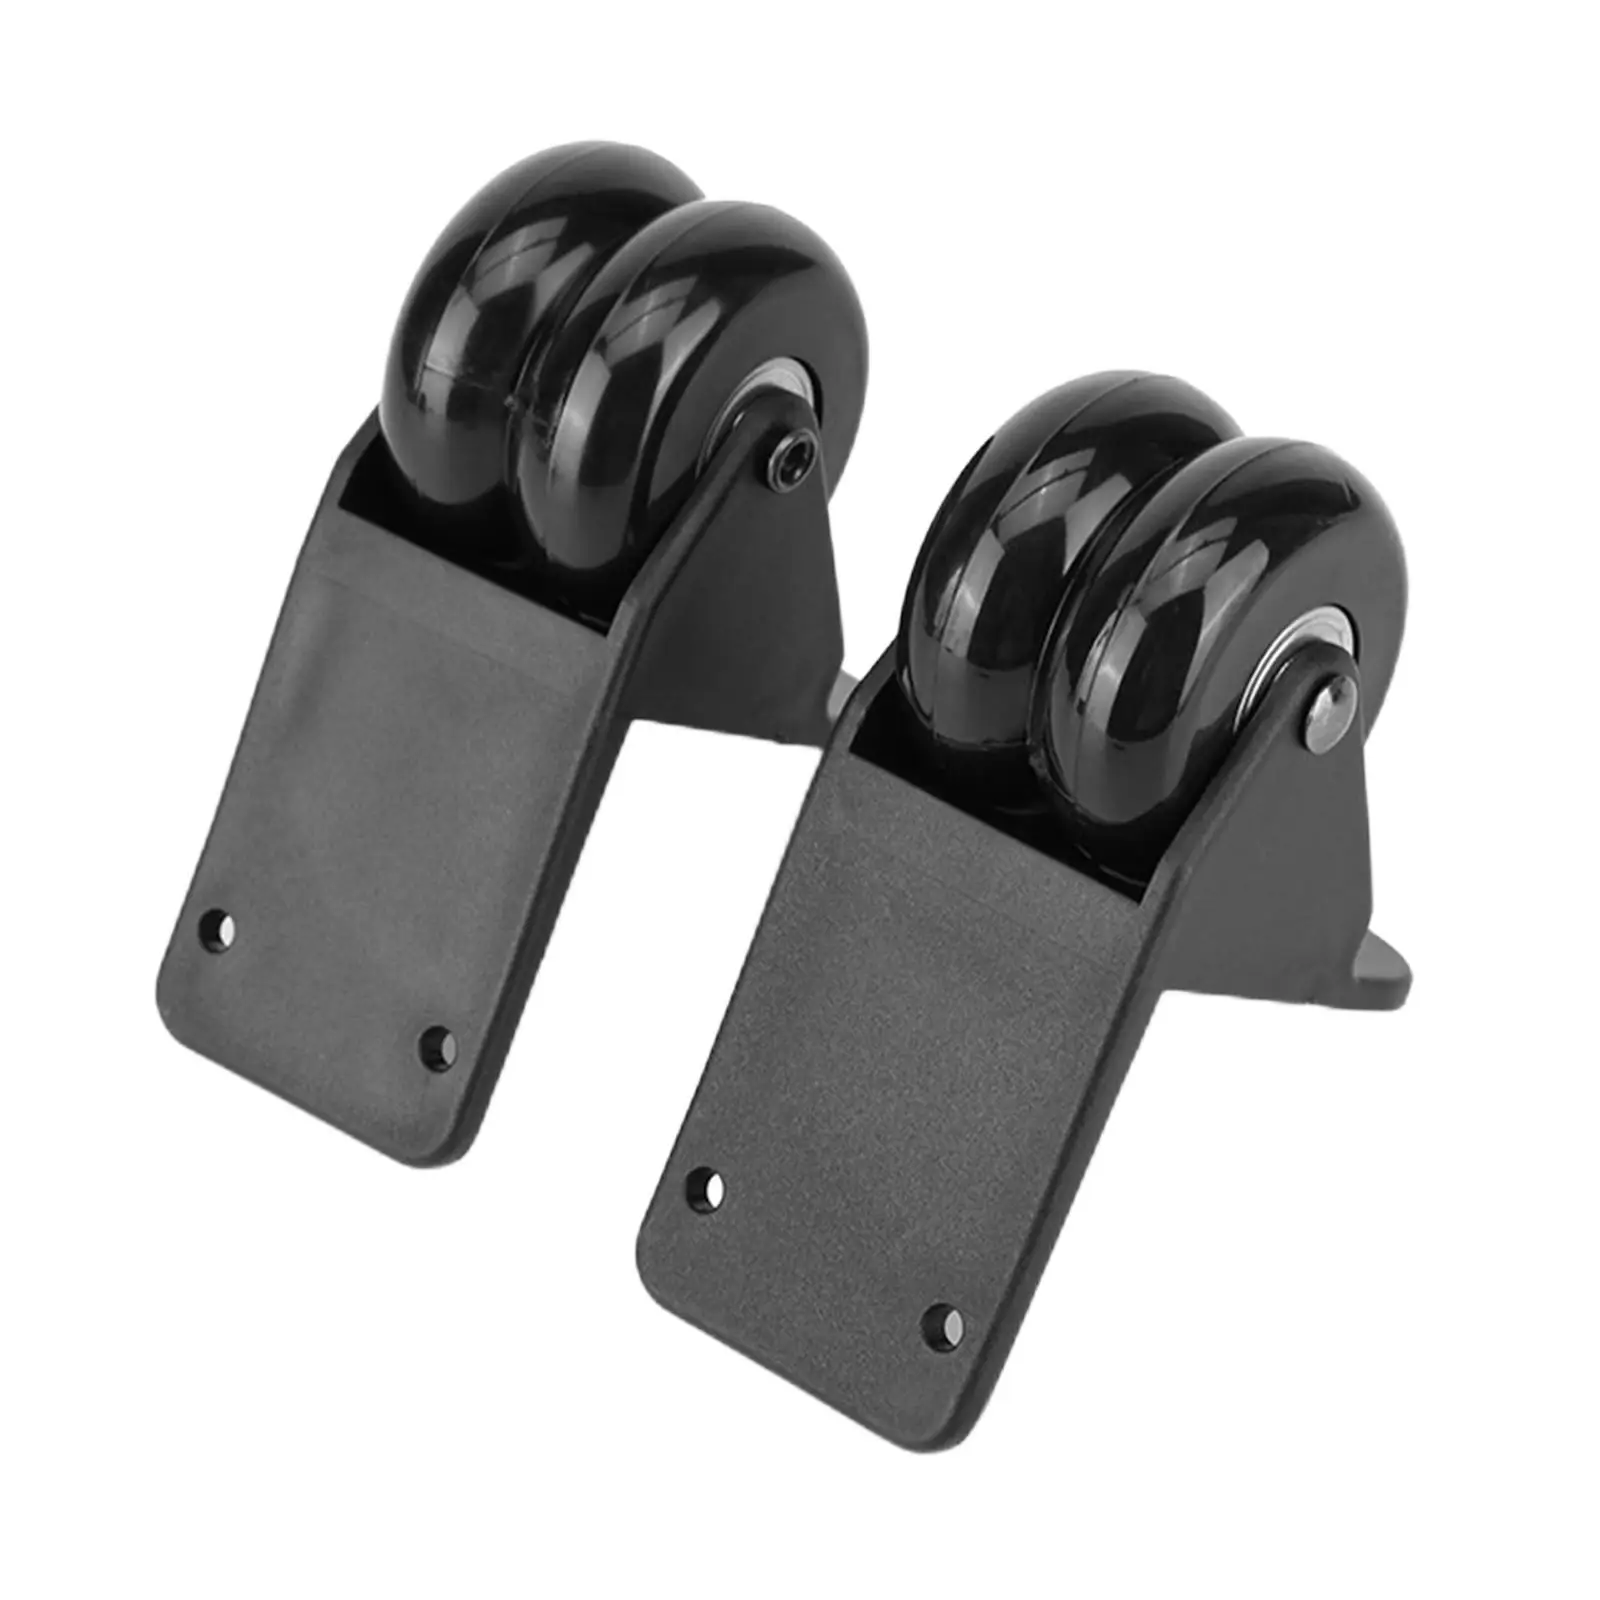 2x Repair Tool Double Row Roller Load Bearing Directional Suitcase Wheels DIY Replacement Parts Mute for Office Outdoor Travel